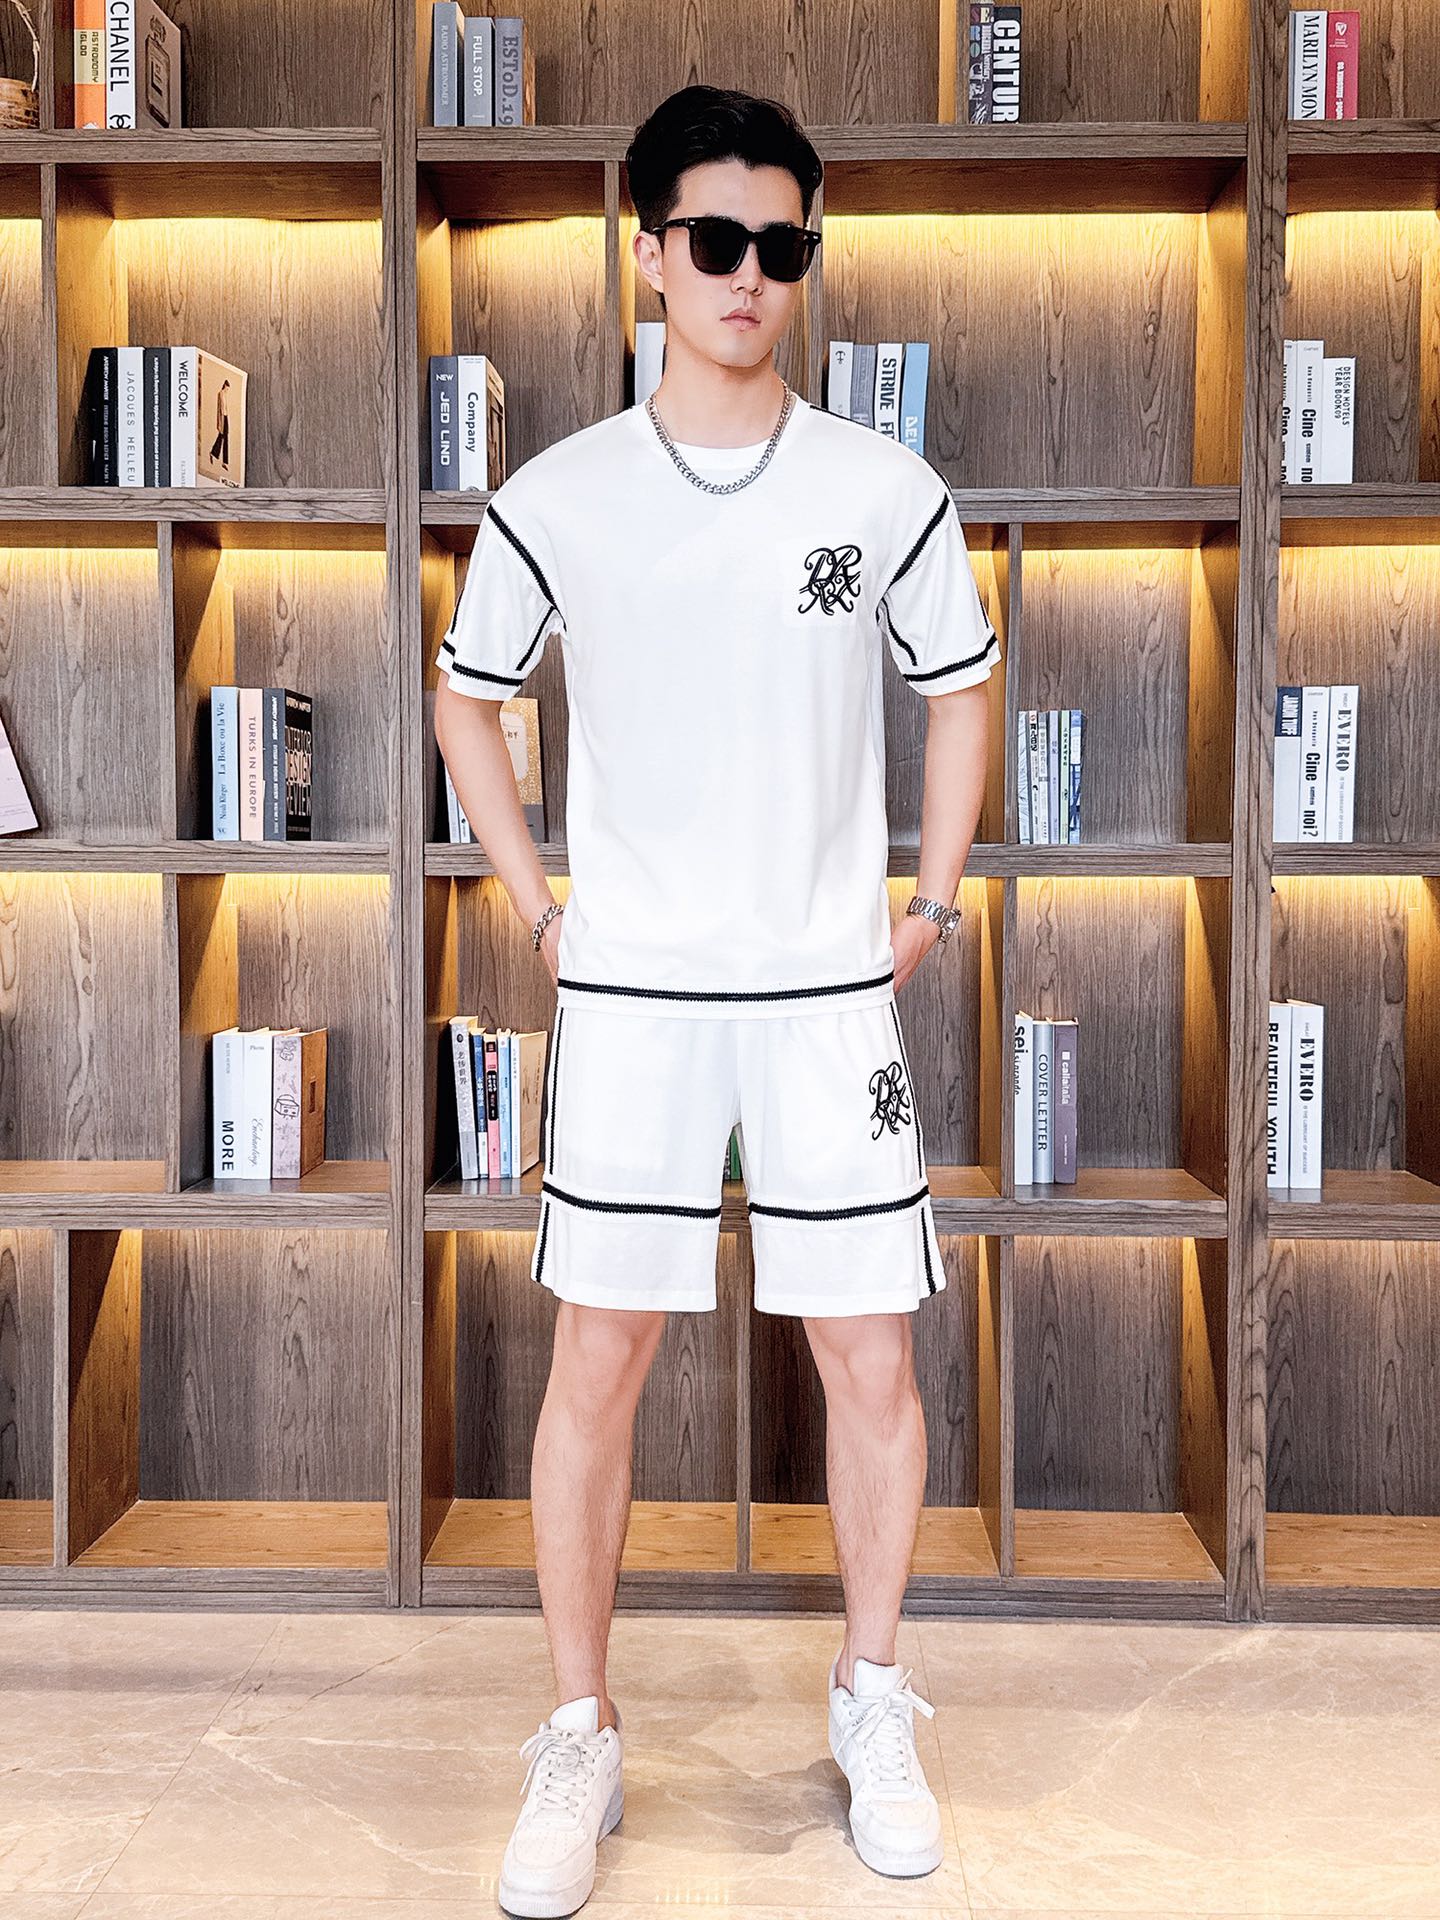 Dior Clothing Shorts T-Shirt Two Piece Outfits & Matching Sets Men Summer Collection Fashion Short Sleeve